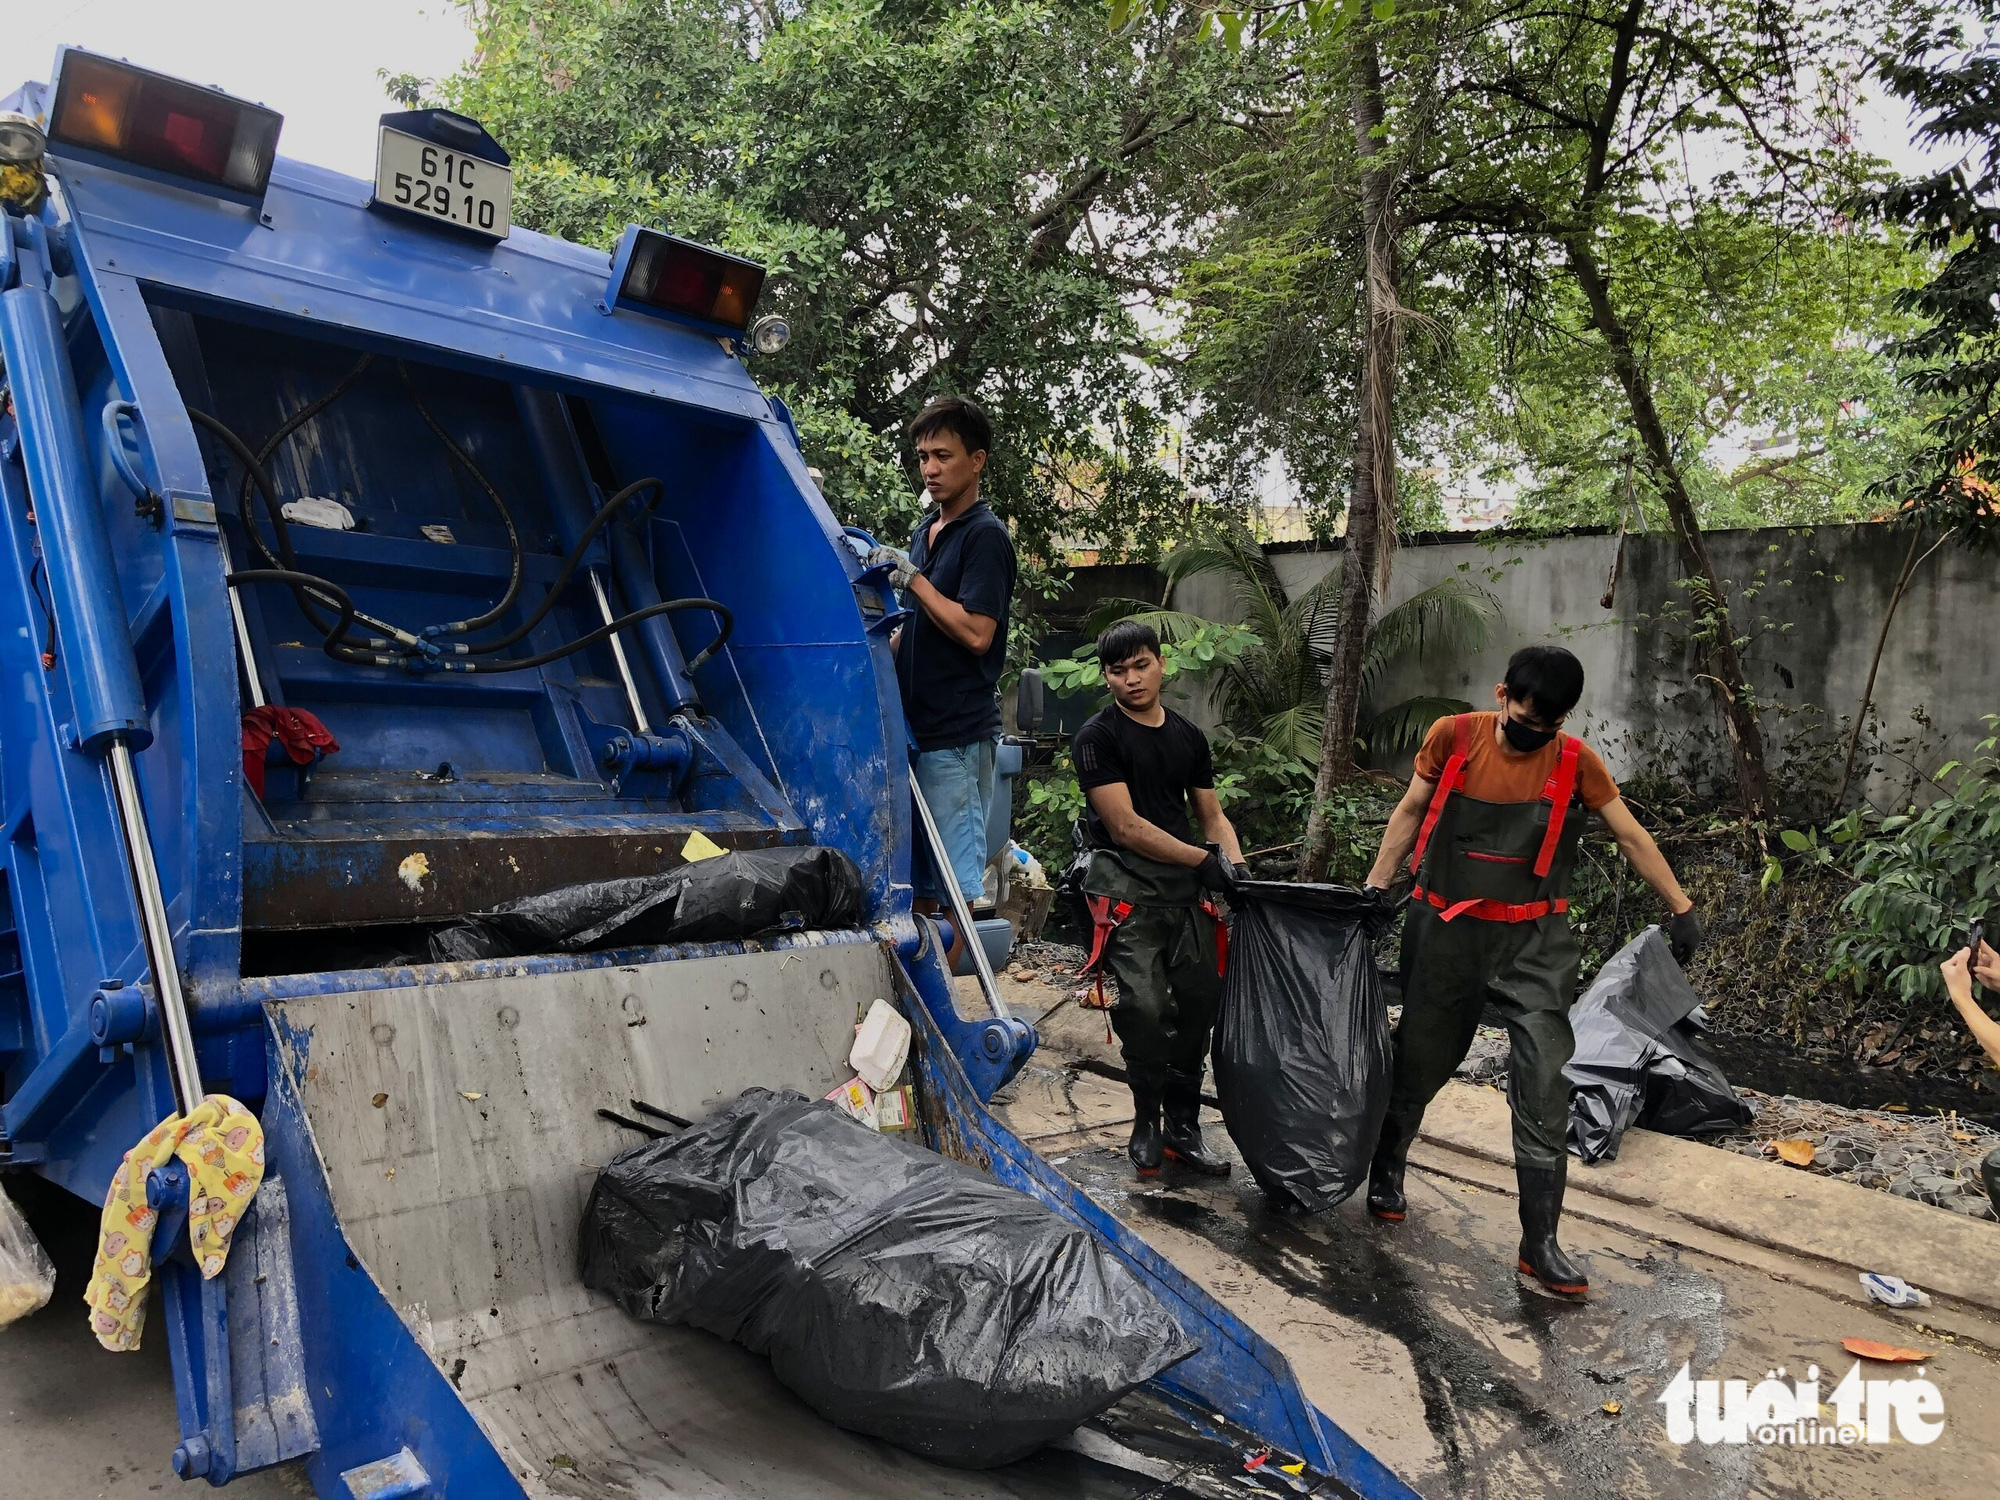 Many garbage trucks and sanitation workers help them transport garbage to landfills. Nguyen Van Hai, a sanitation worker, said ‘Seeing them collect garbage, I feel happy and thankful.’